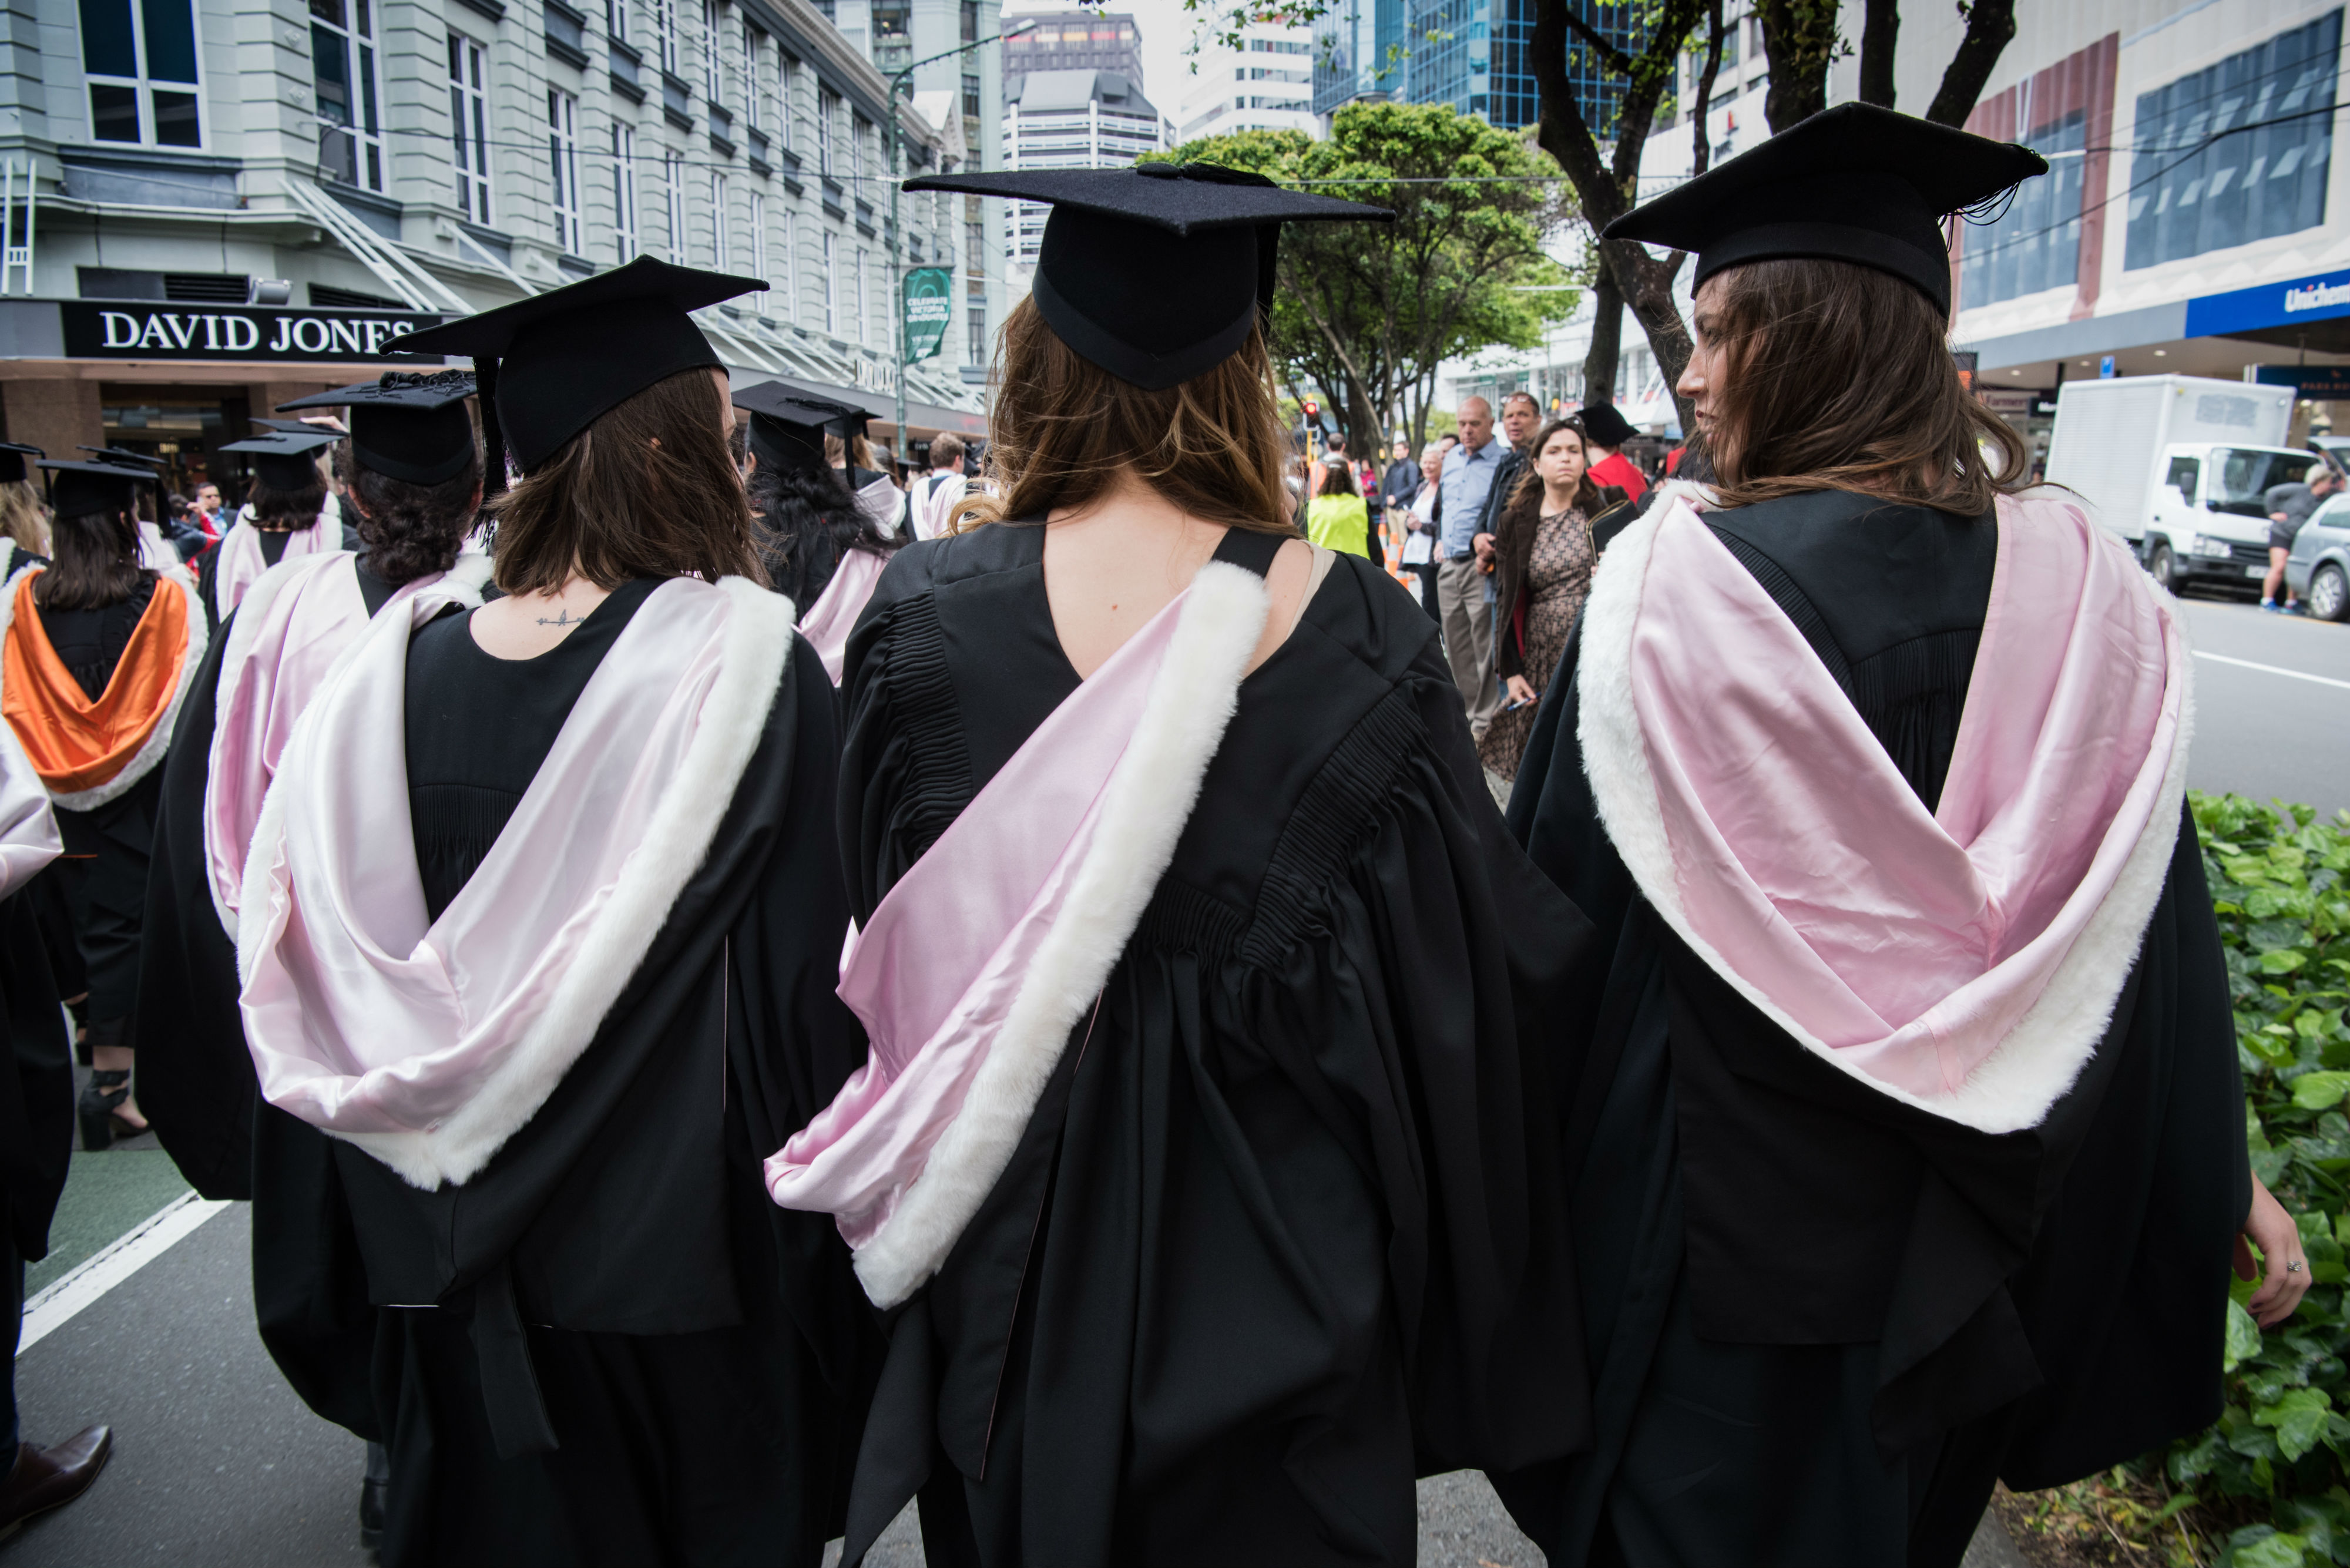 Three women marching with thier backs to the camera wearing Humanities robes.